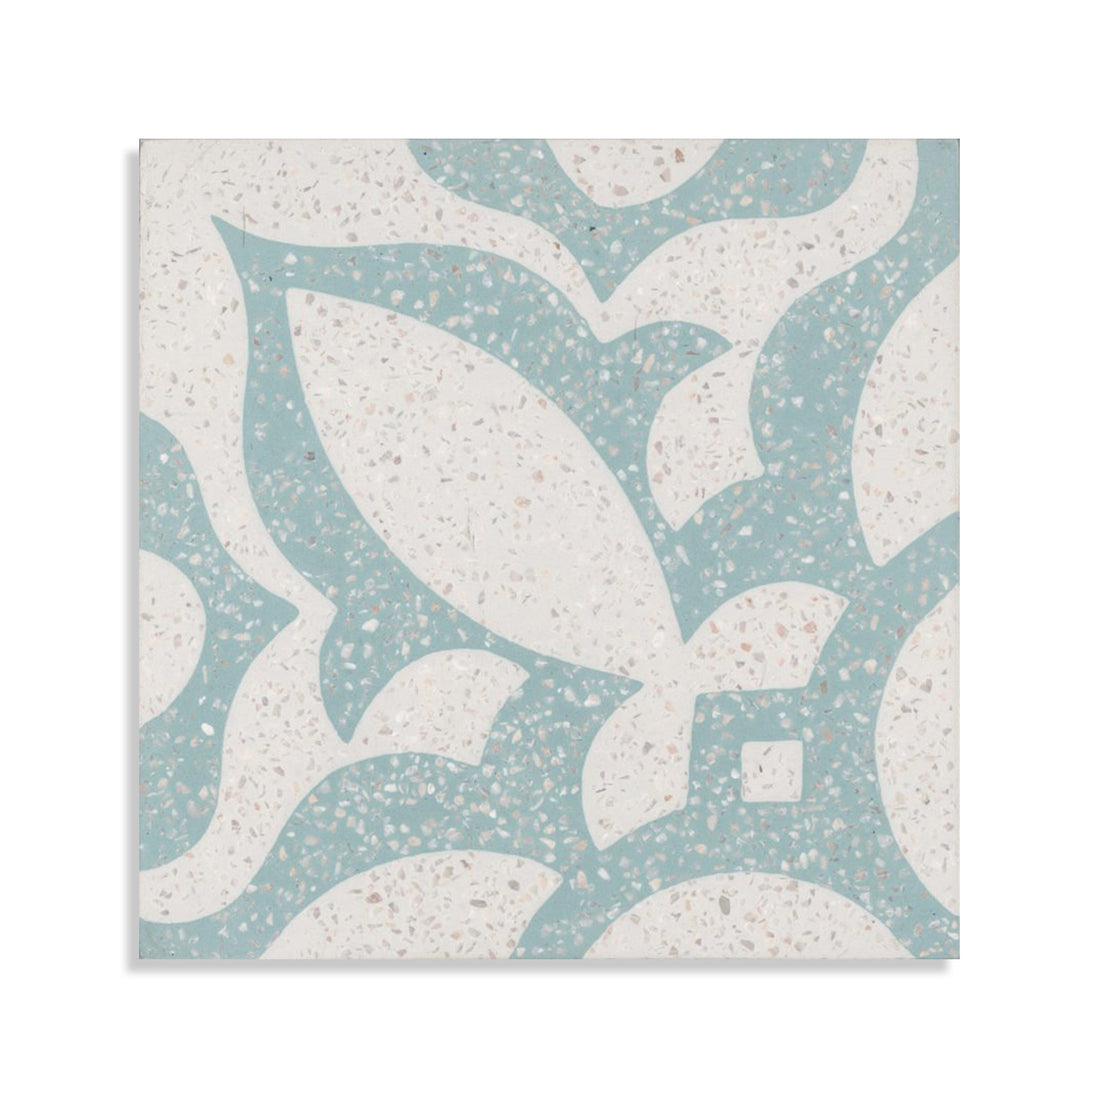 Moroccan Encaustic Cement Pattern 15a Terrazzo, 20 x 20cm - Tiles &amp; Stone To You